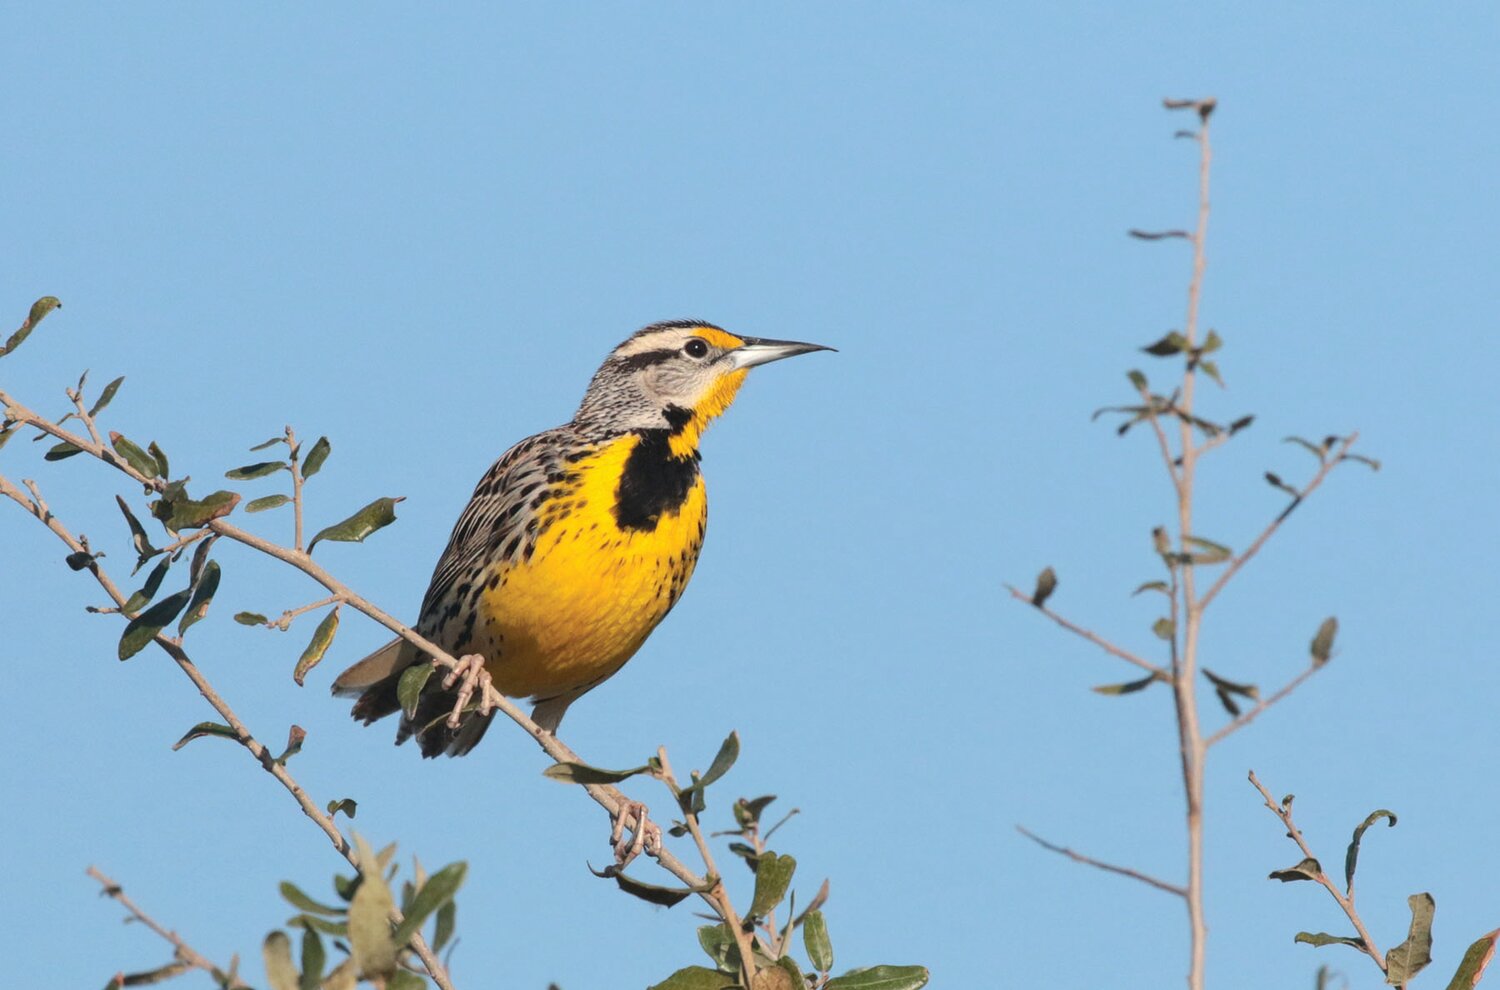 The importance of greenspaces within the urban areas provides essential habitats for the migrating warblers and meadowlarks.